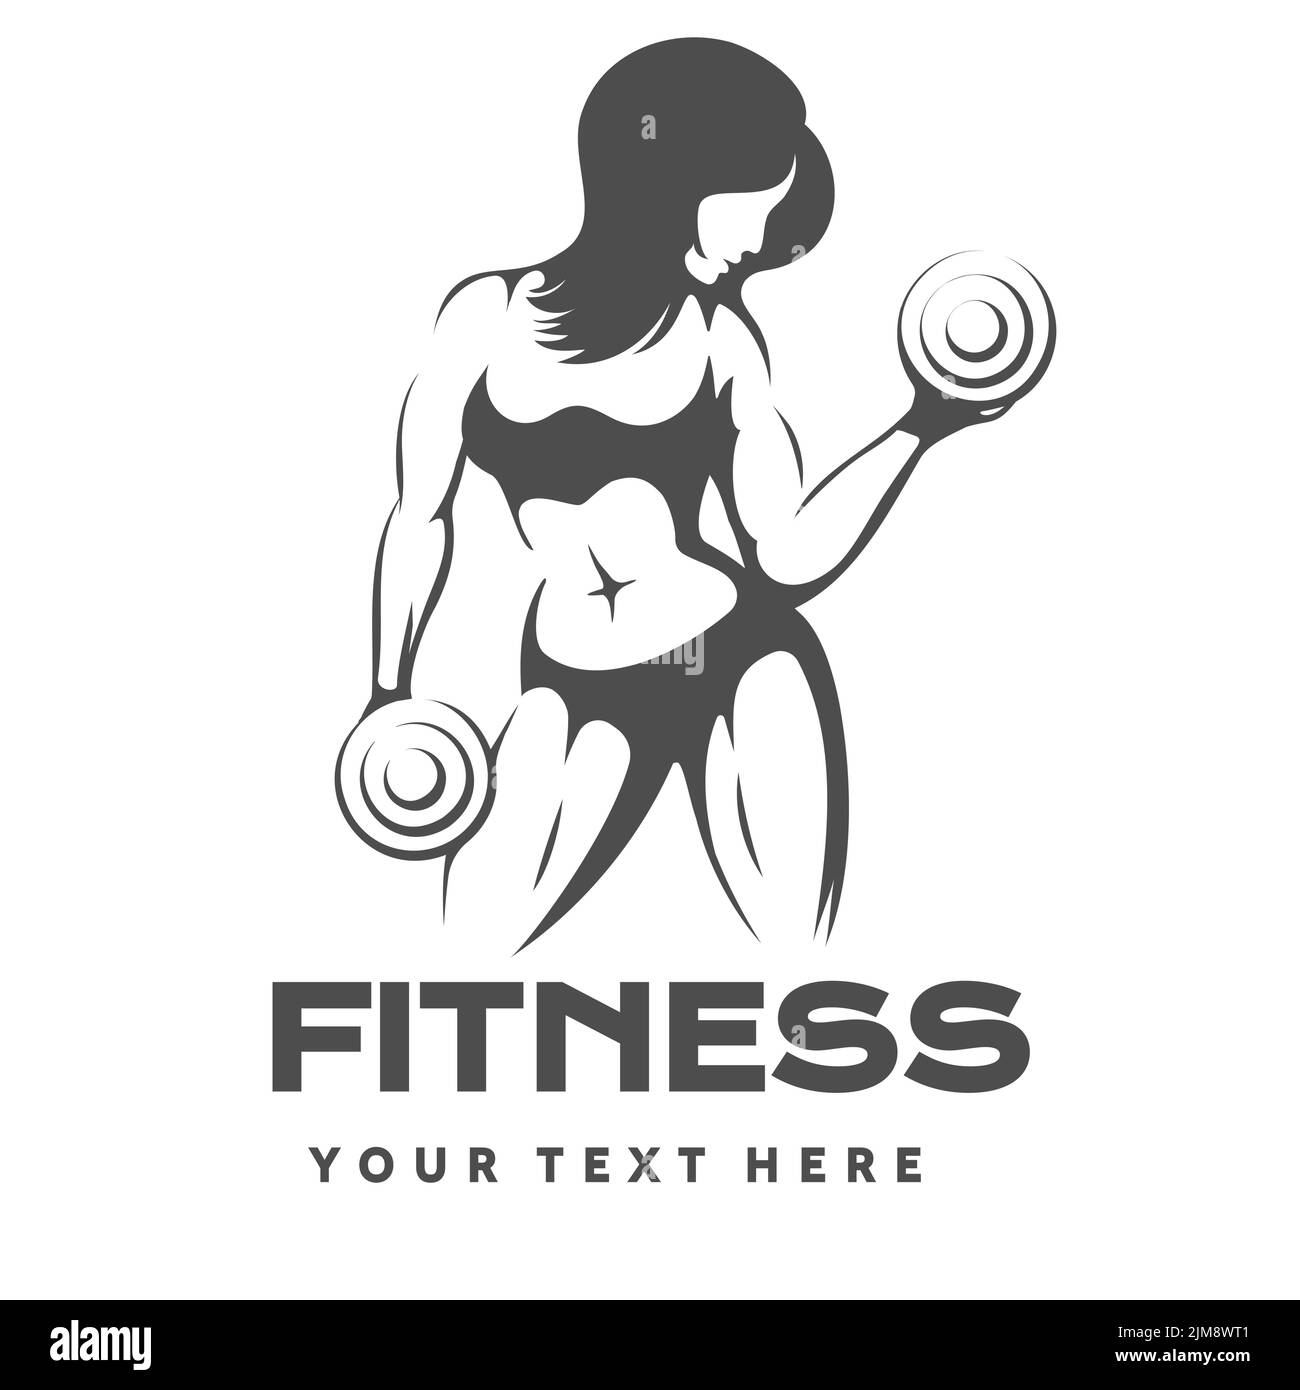 Fitness Club Logo Or Emblem With Woman Silhouette Woman Holds